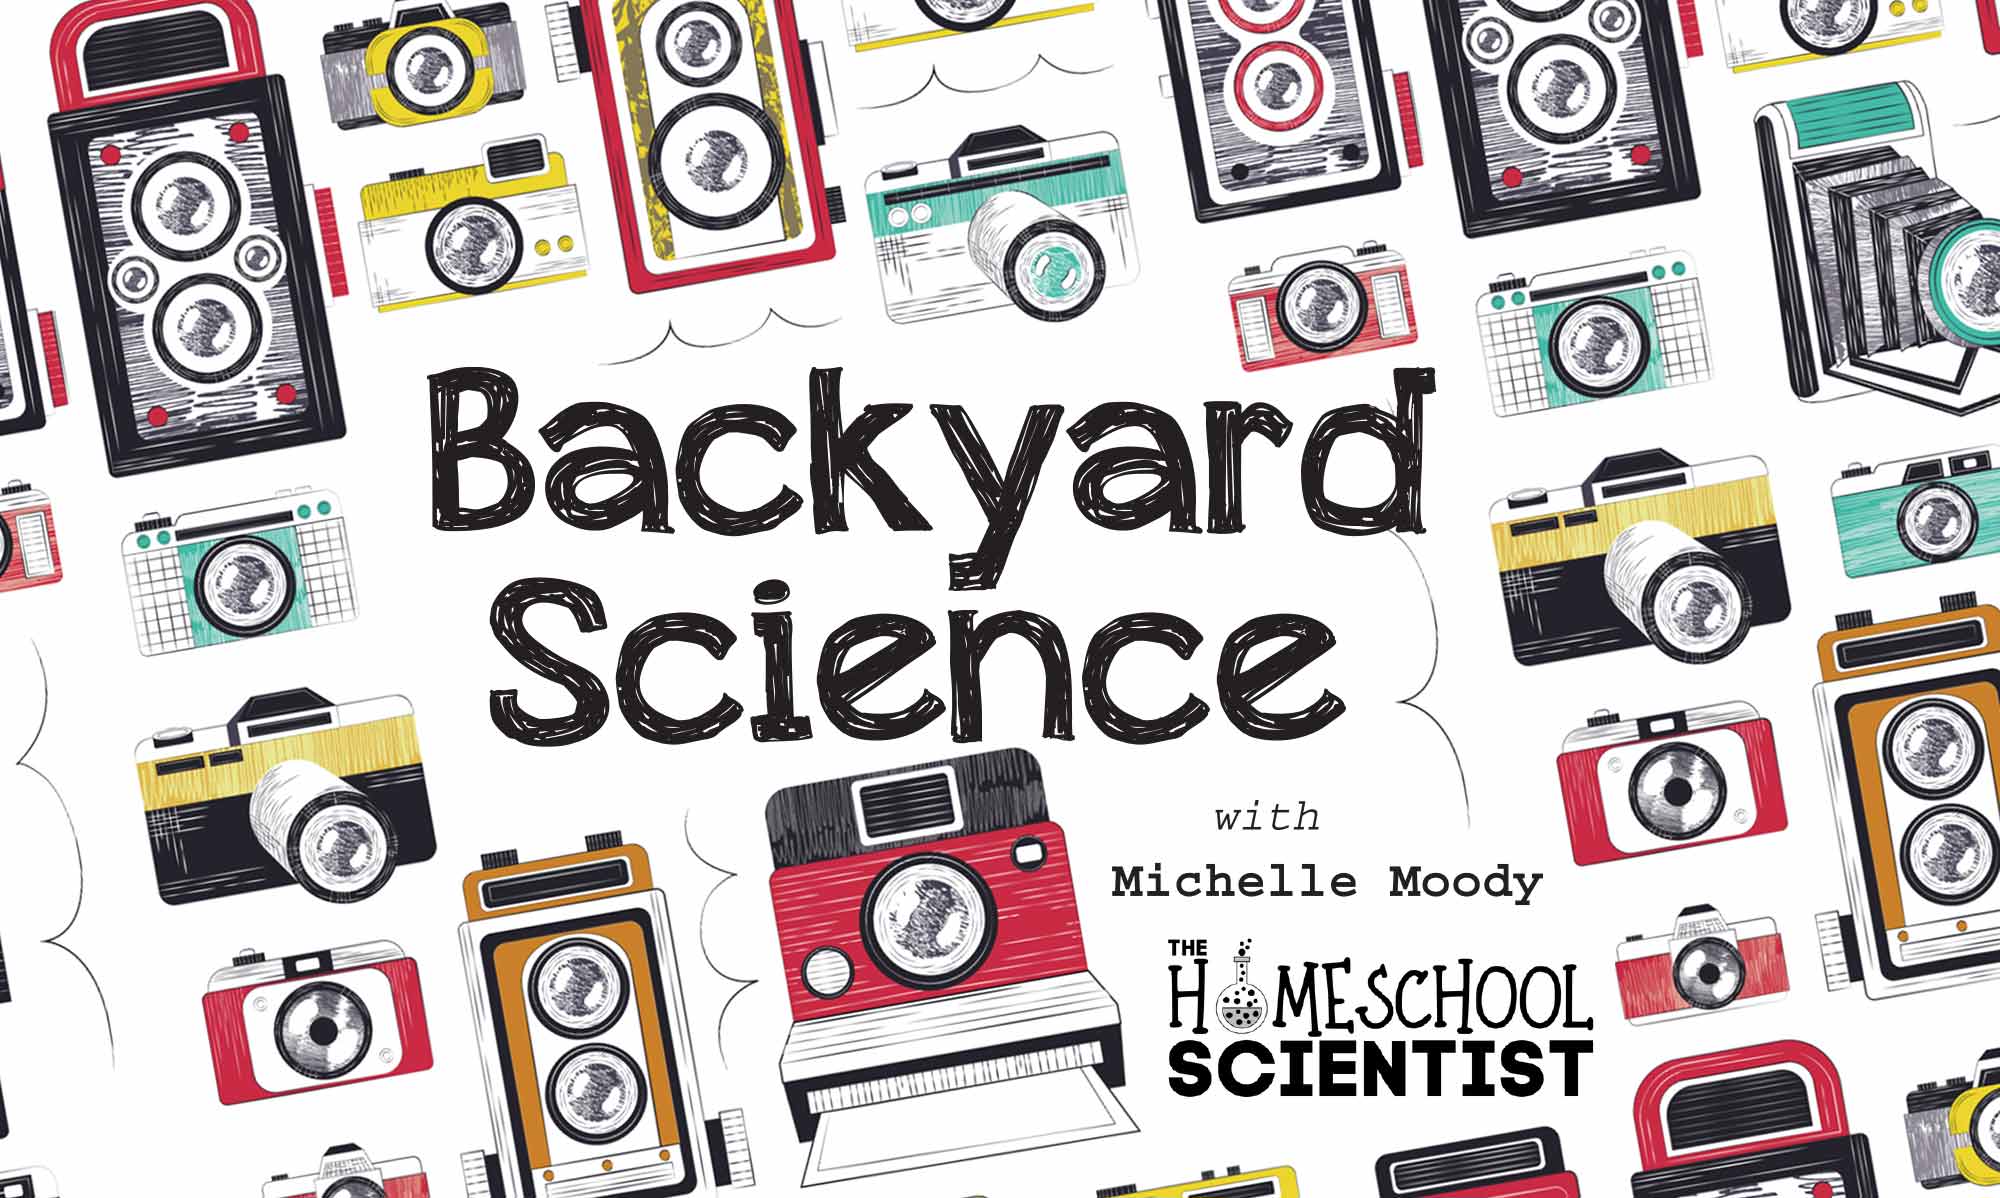 Backyard Science title with illustrations of old cameras surrounding it